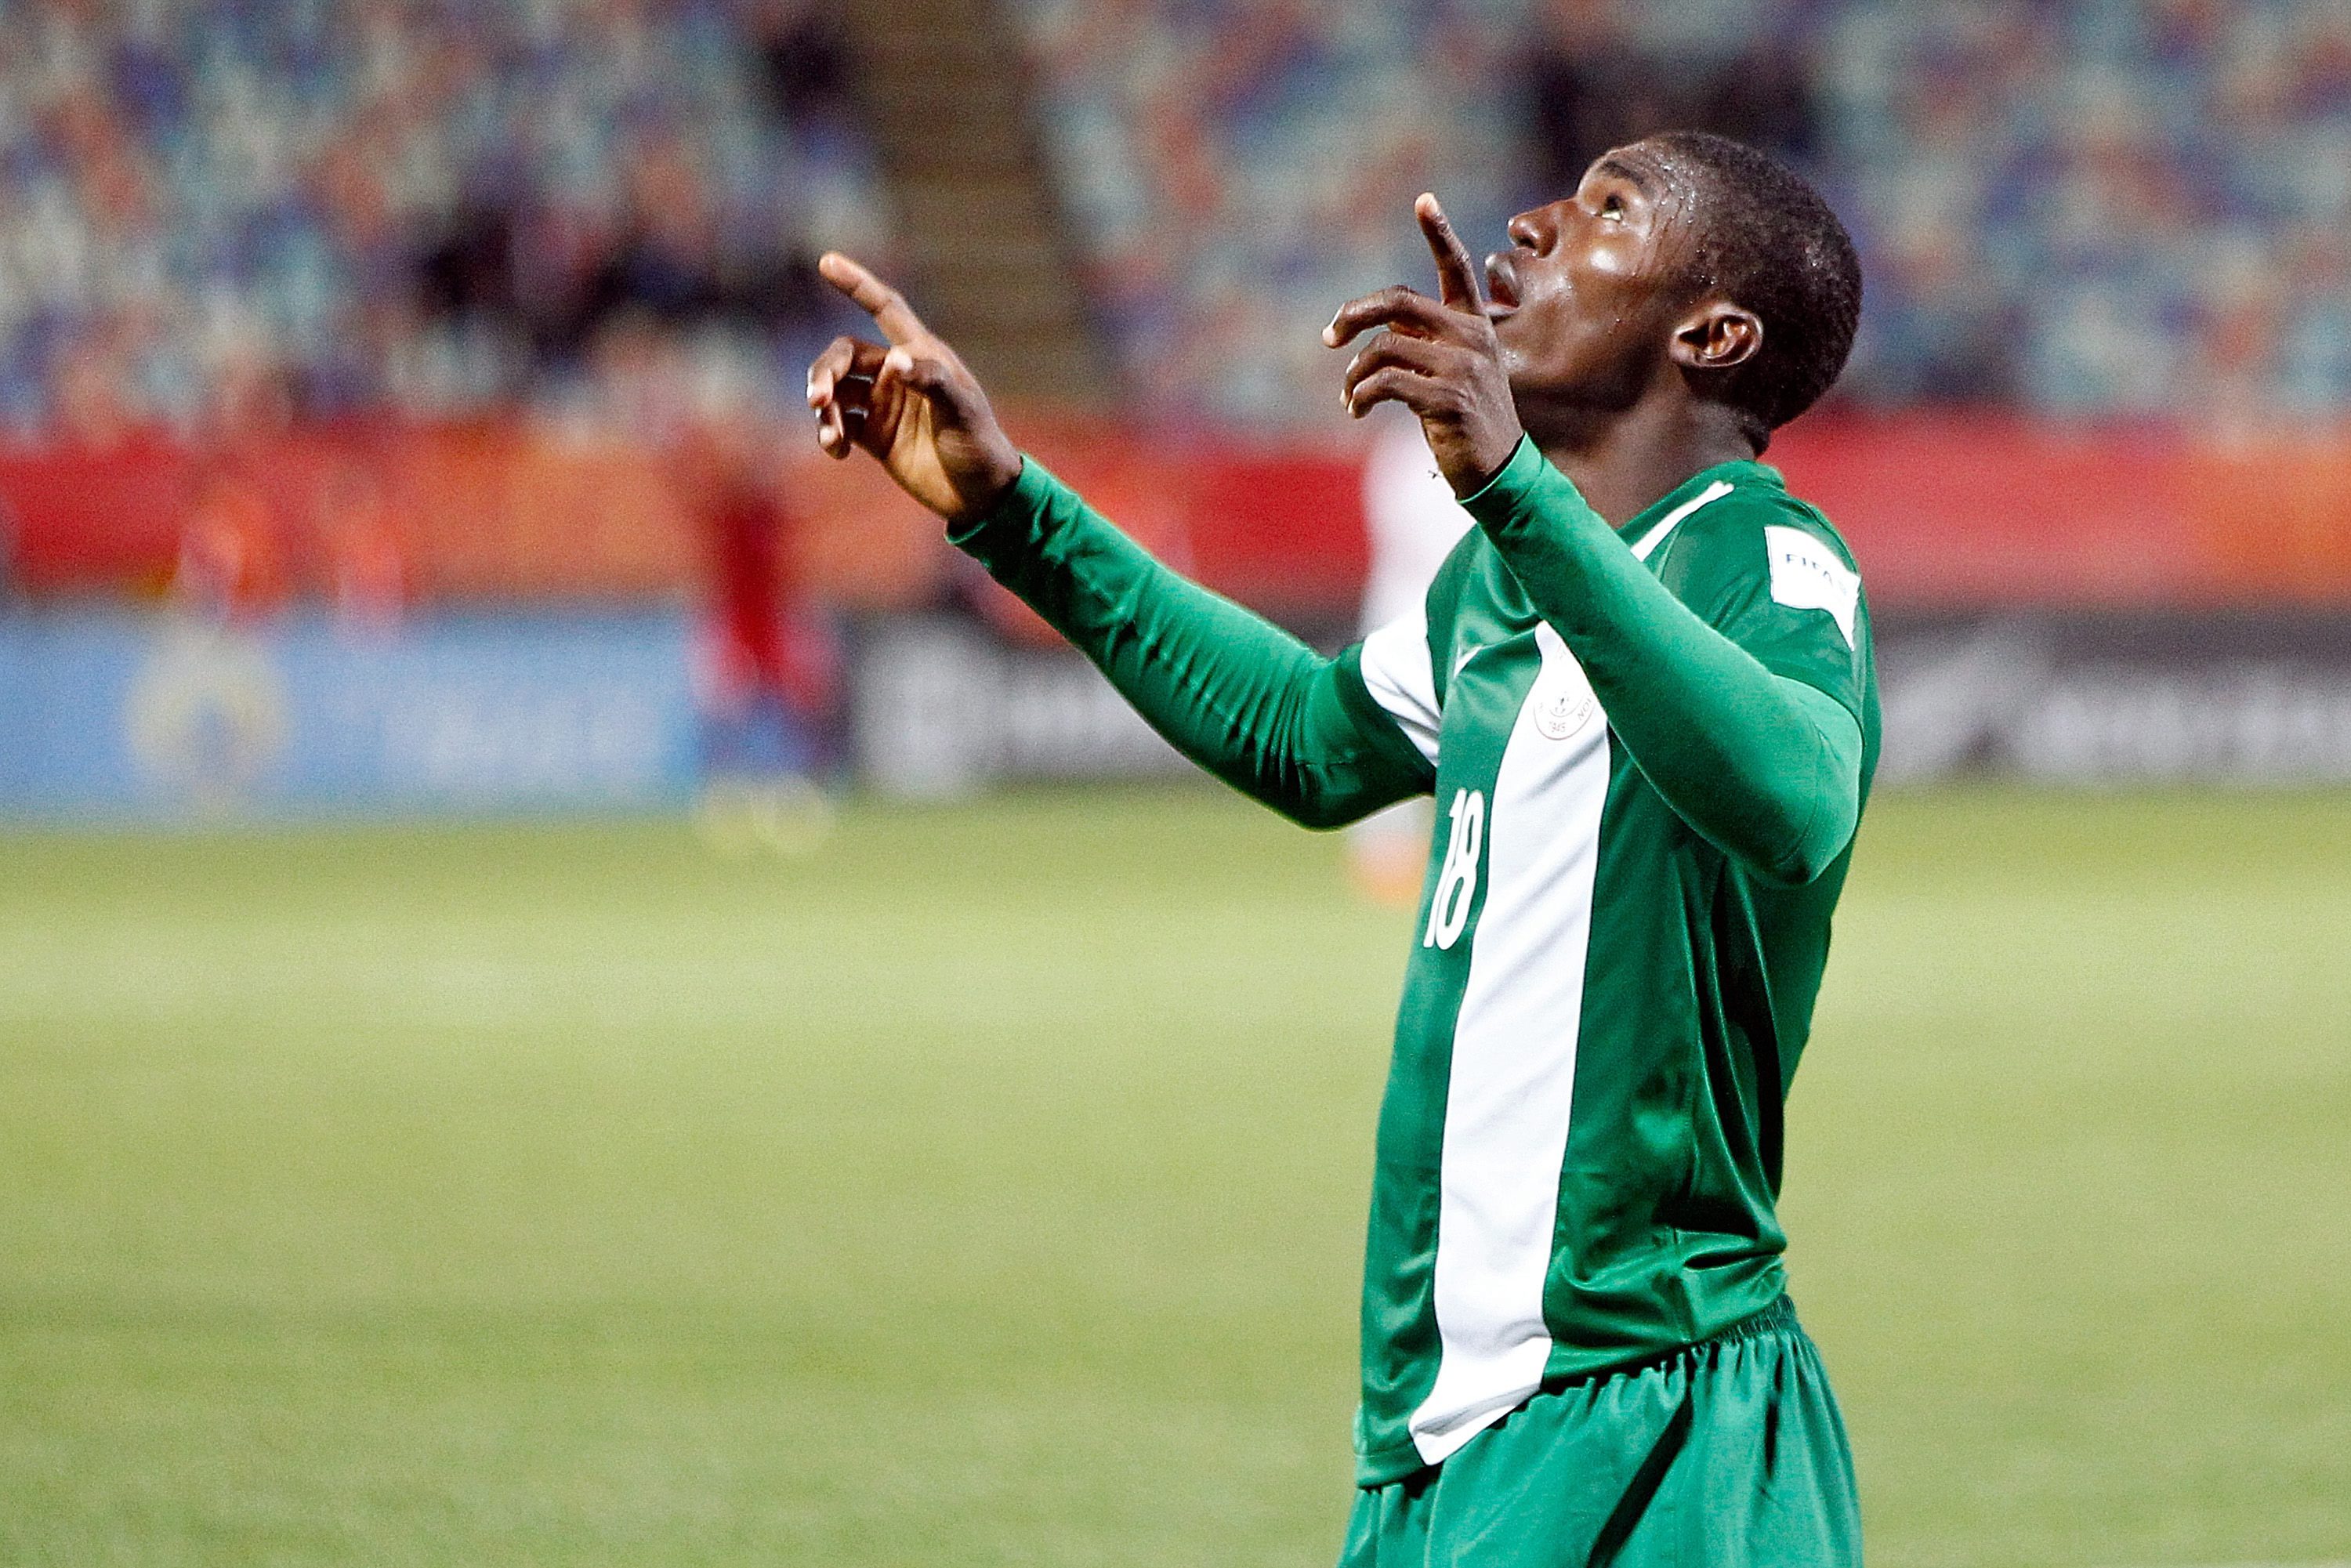 epa04787366 Taiwo Awoniyi of Nigeria celebrates after scoring a goal during the FIFA Under-20 World Cup 2015 group E match between Hungary and Nigeria in New Plymouth, New Zealand, 07 June 2015.  EPA/DEAN PEMBERTON EDITORIAL USE ONLY NOT TO BE USED IN ASSOCATION WITH ANY COMMERCIAL ENTITY - IMAGES MUST NOT BE USED IN ANY FORM OF ALERT OR PUSH SERVICE OF ANY KIND INCLUDING VIA MOBILE ALERT SERVICES, DOWNLOADS TO MOBILE DEVICES OR MMS MESSAGING